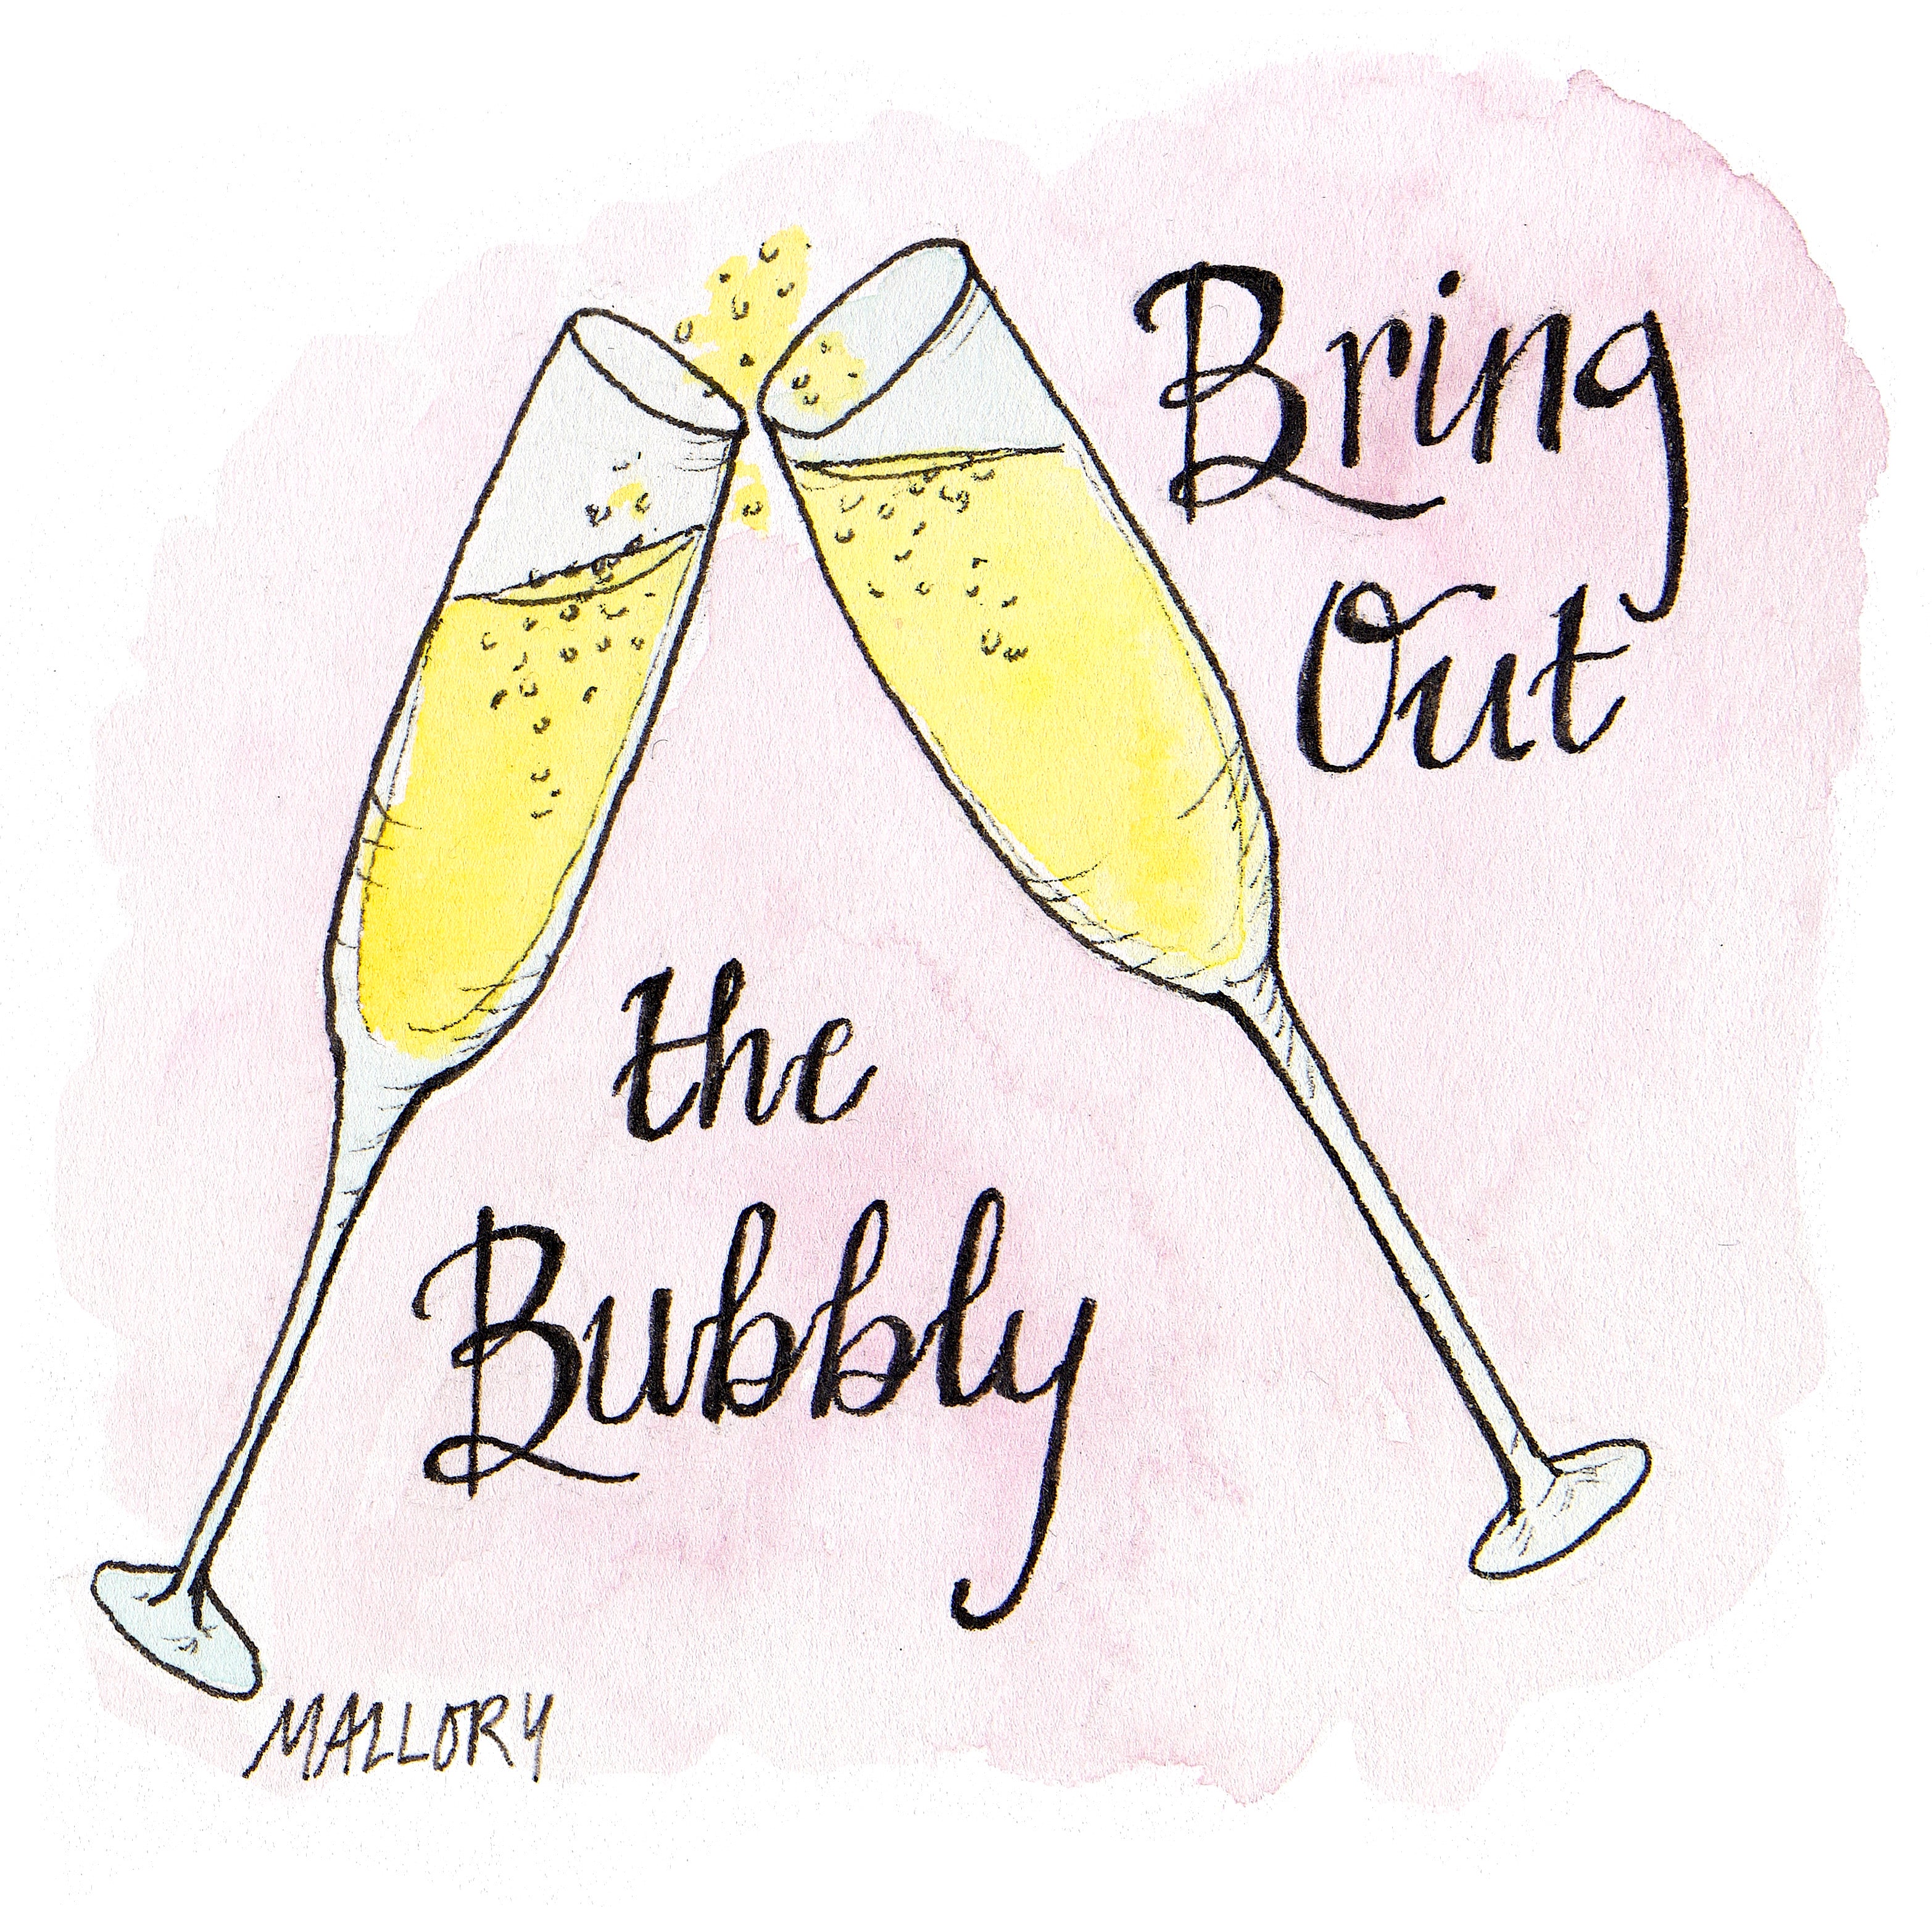 Bring out the Bubbly